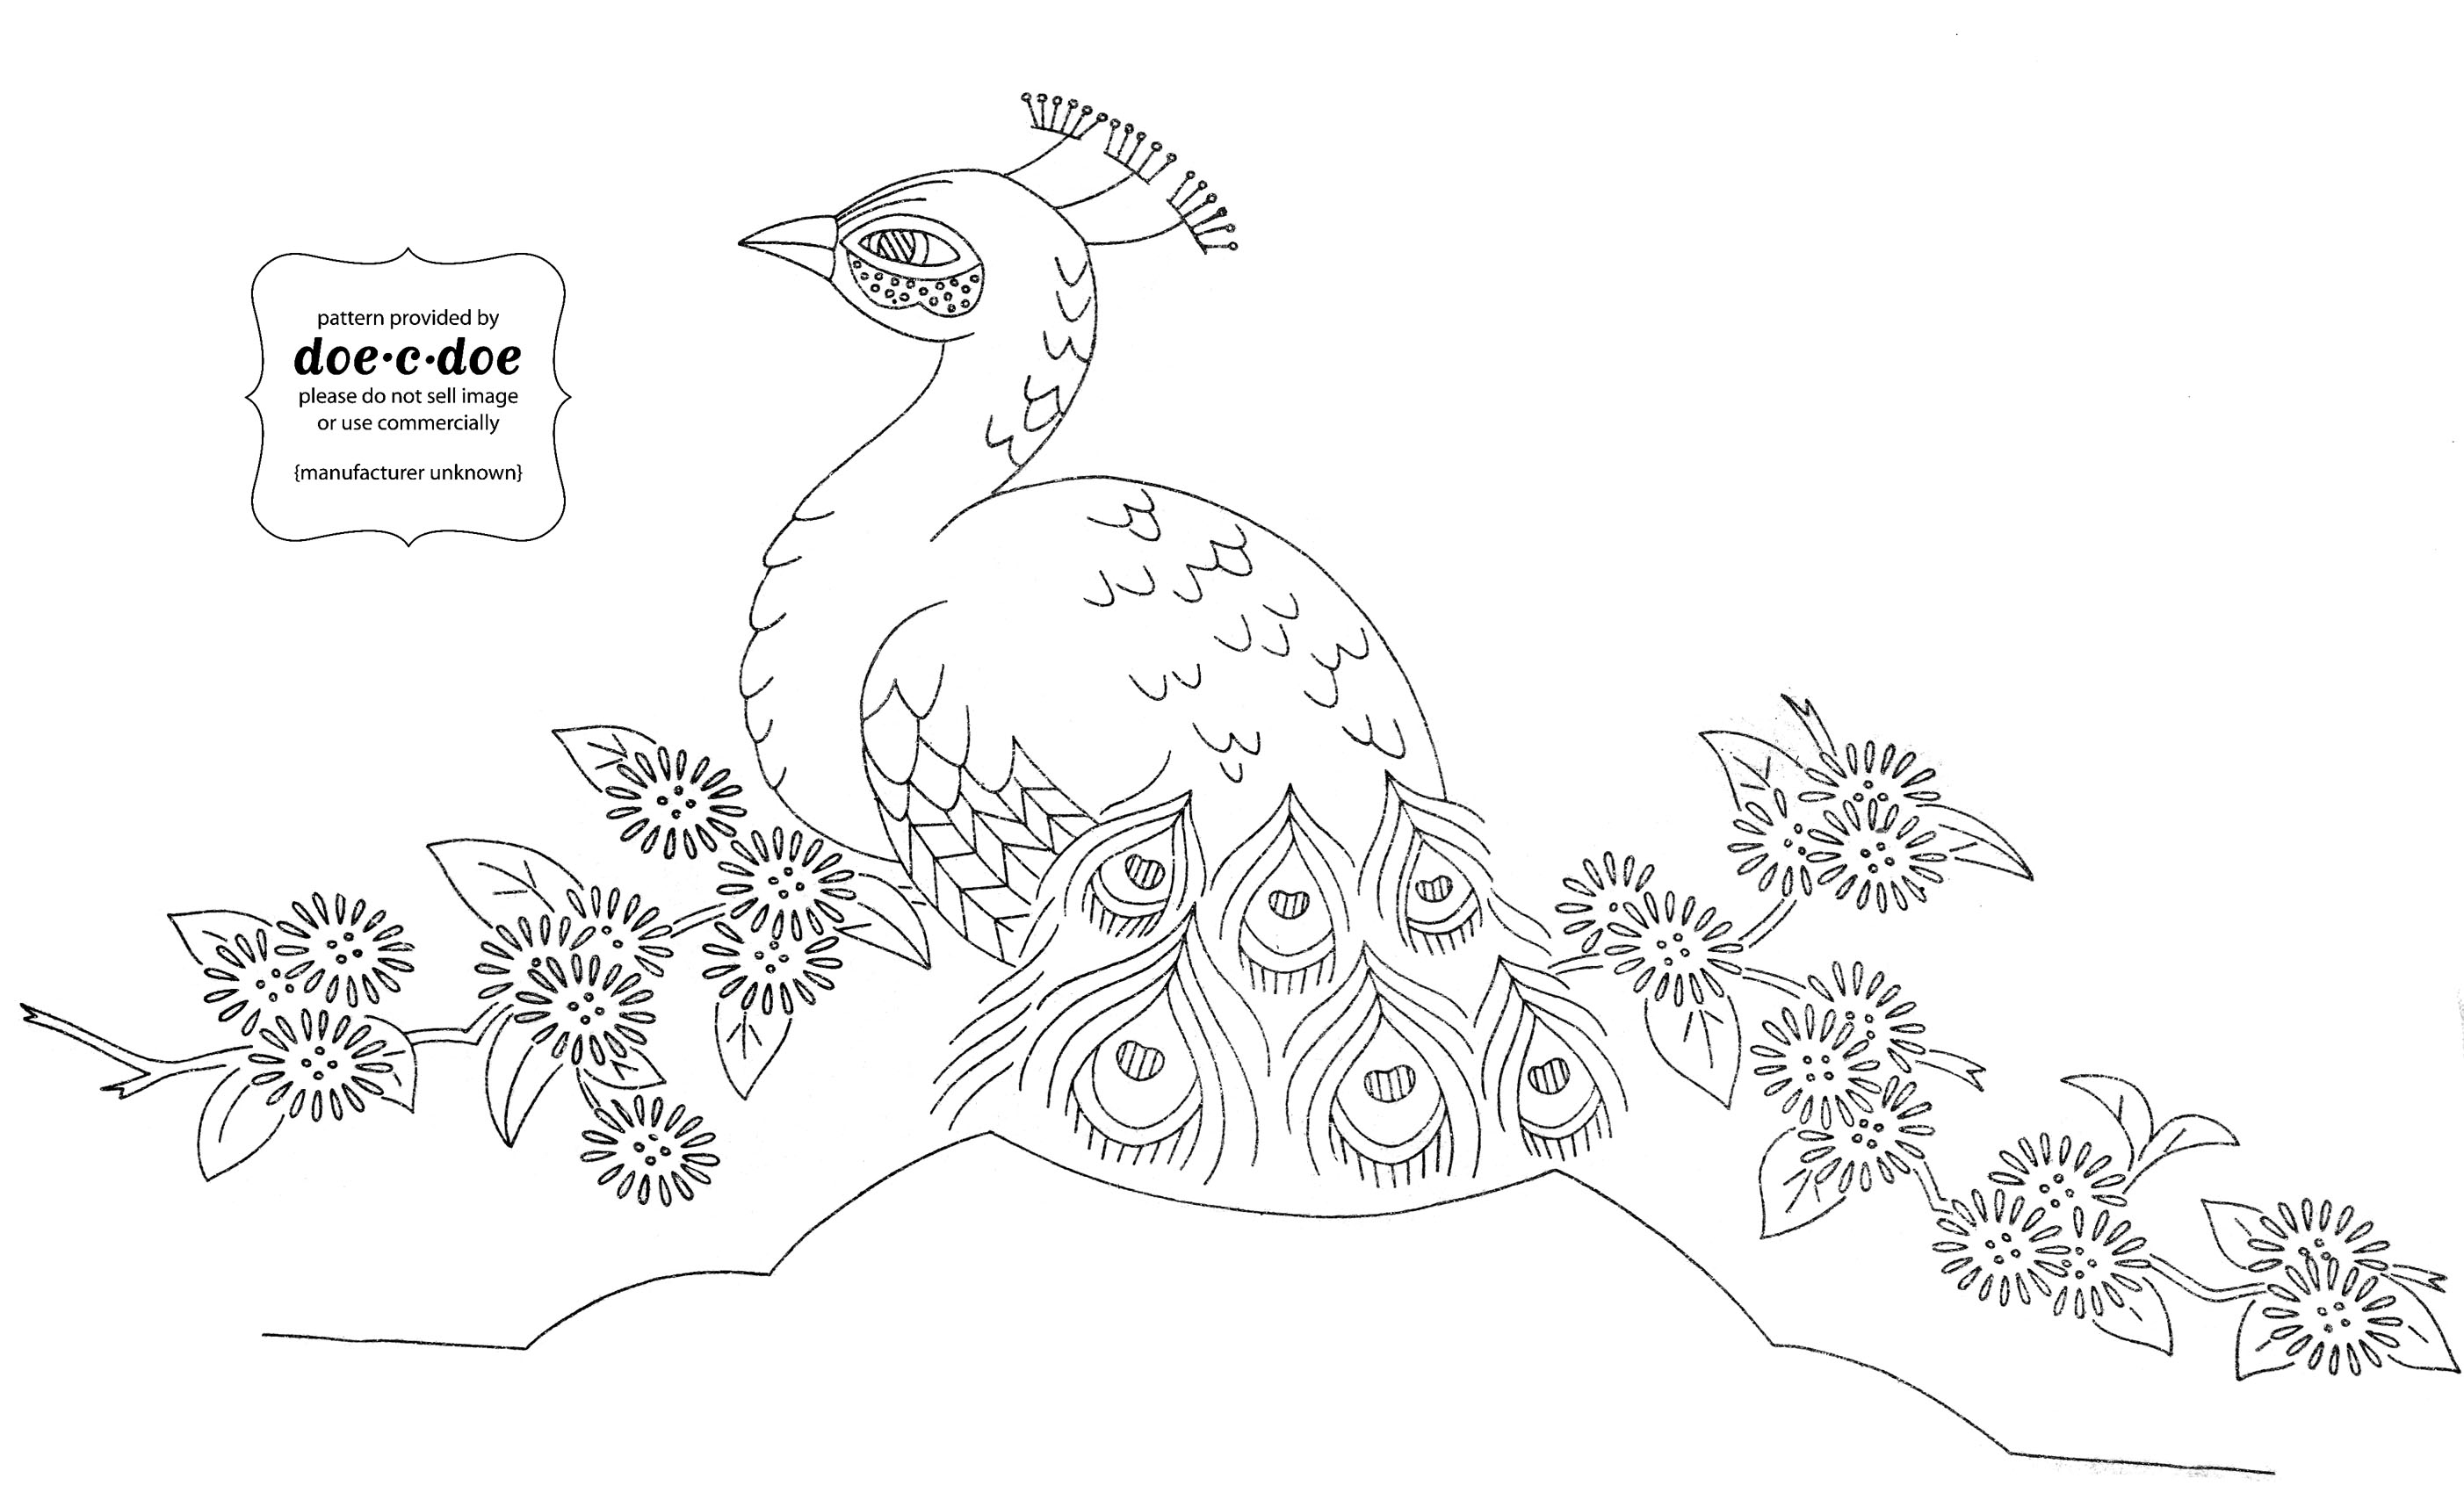 Peacock embroidery design free printable papercraft templates